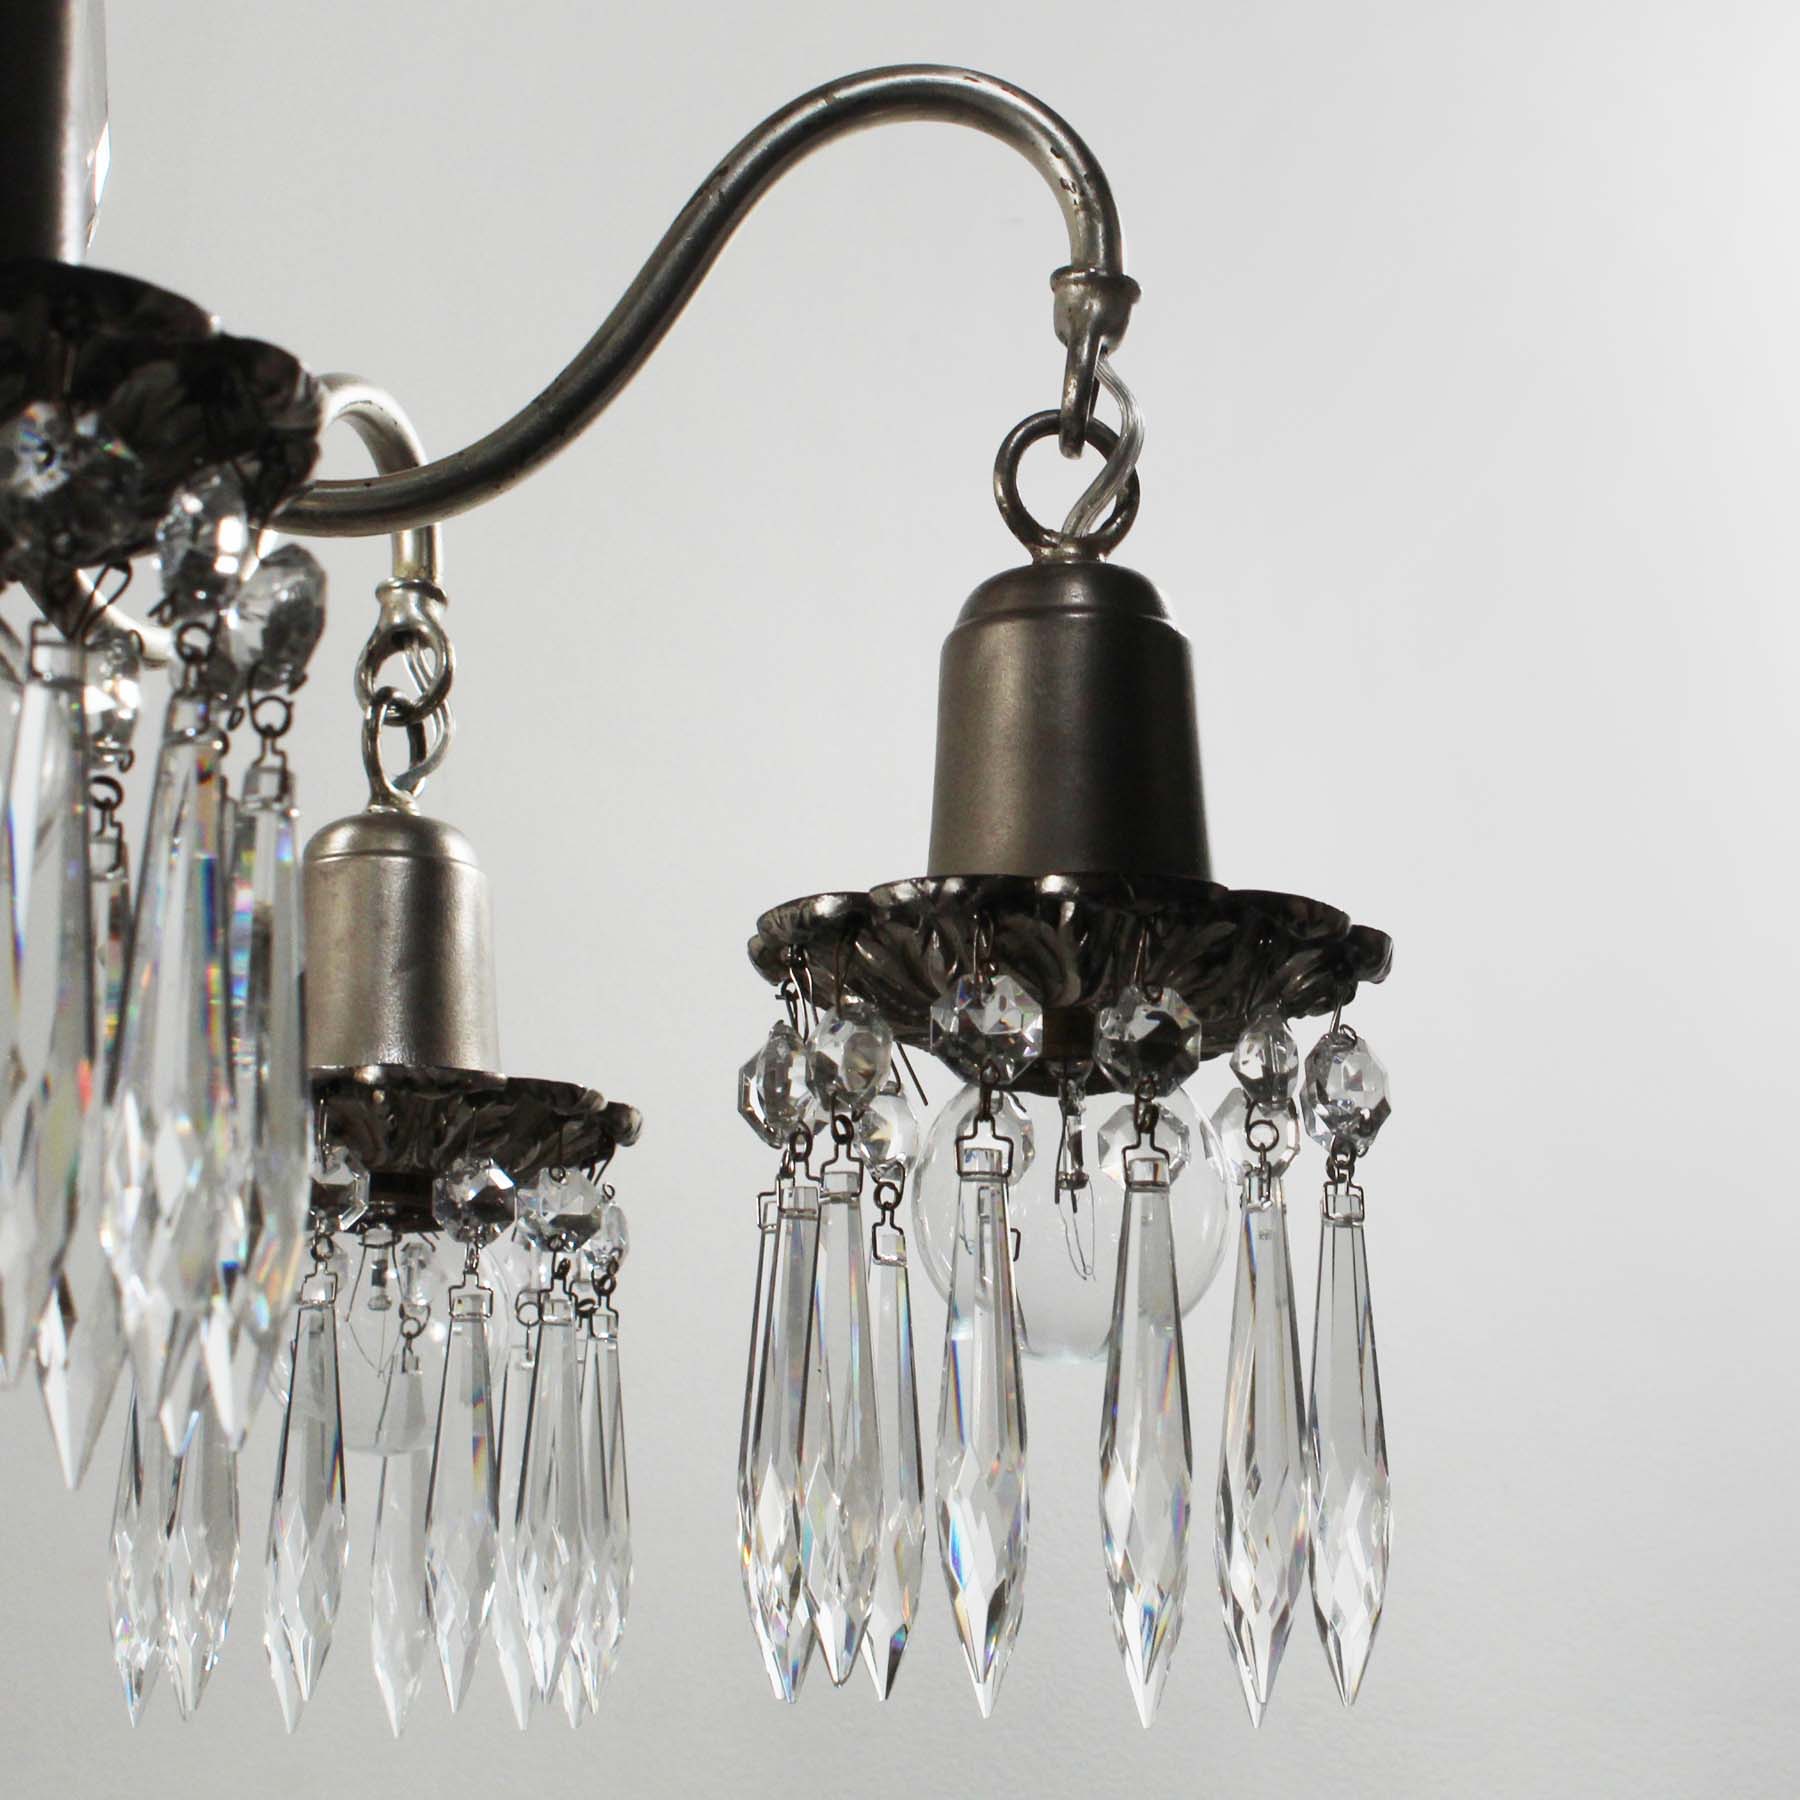 SOLD Antique Neoclassical Silver Plate Chandelier with Prisms, Star Chandelier Co. -69069